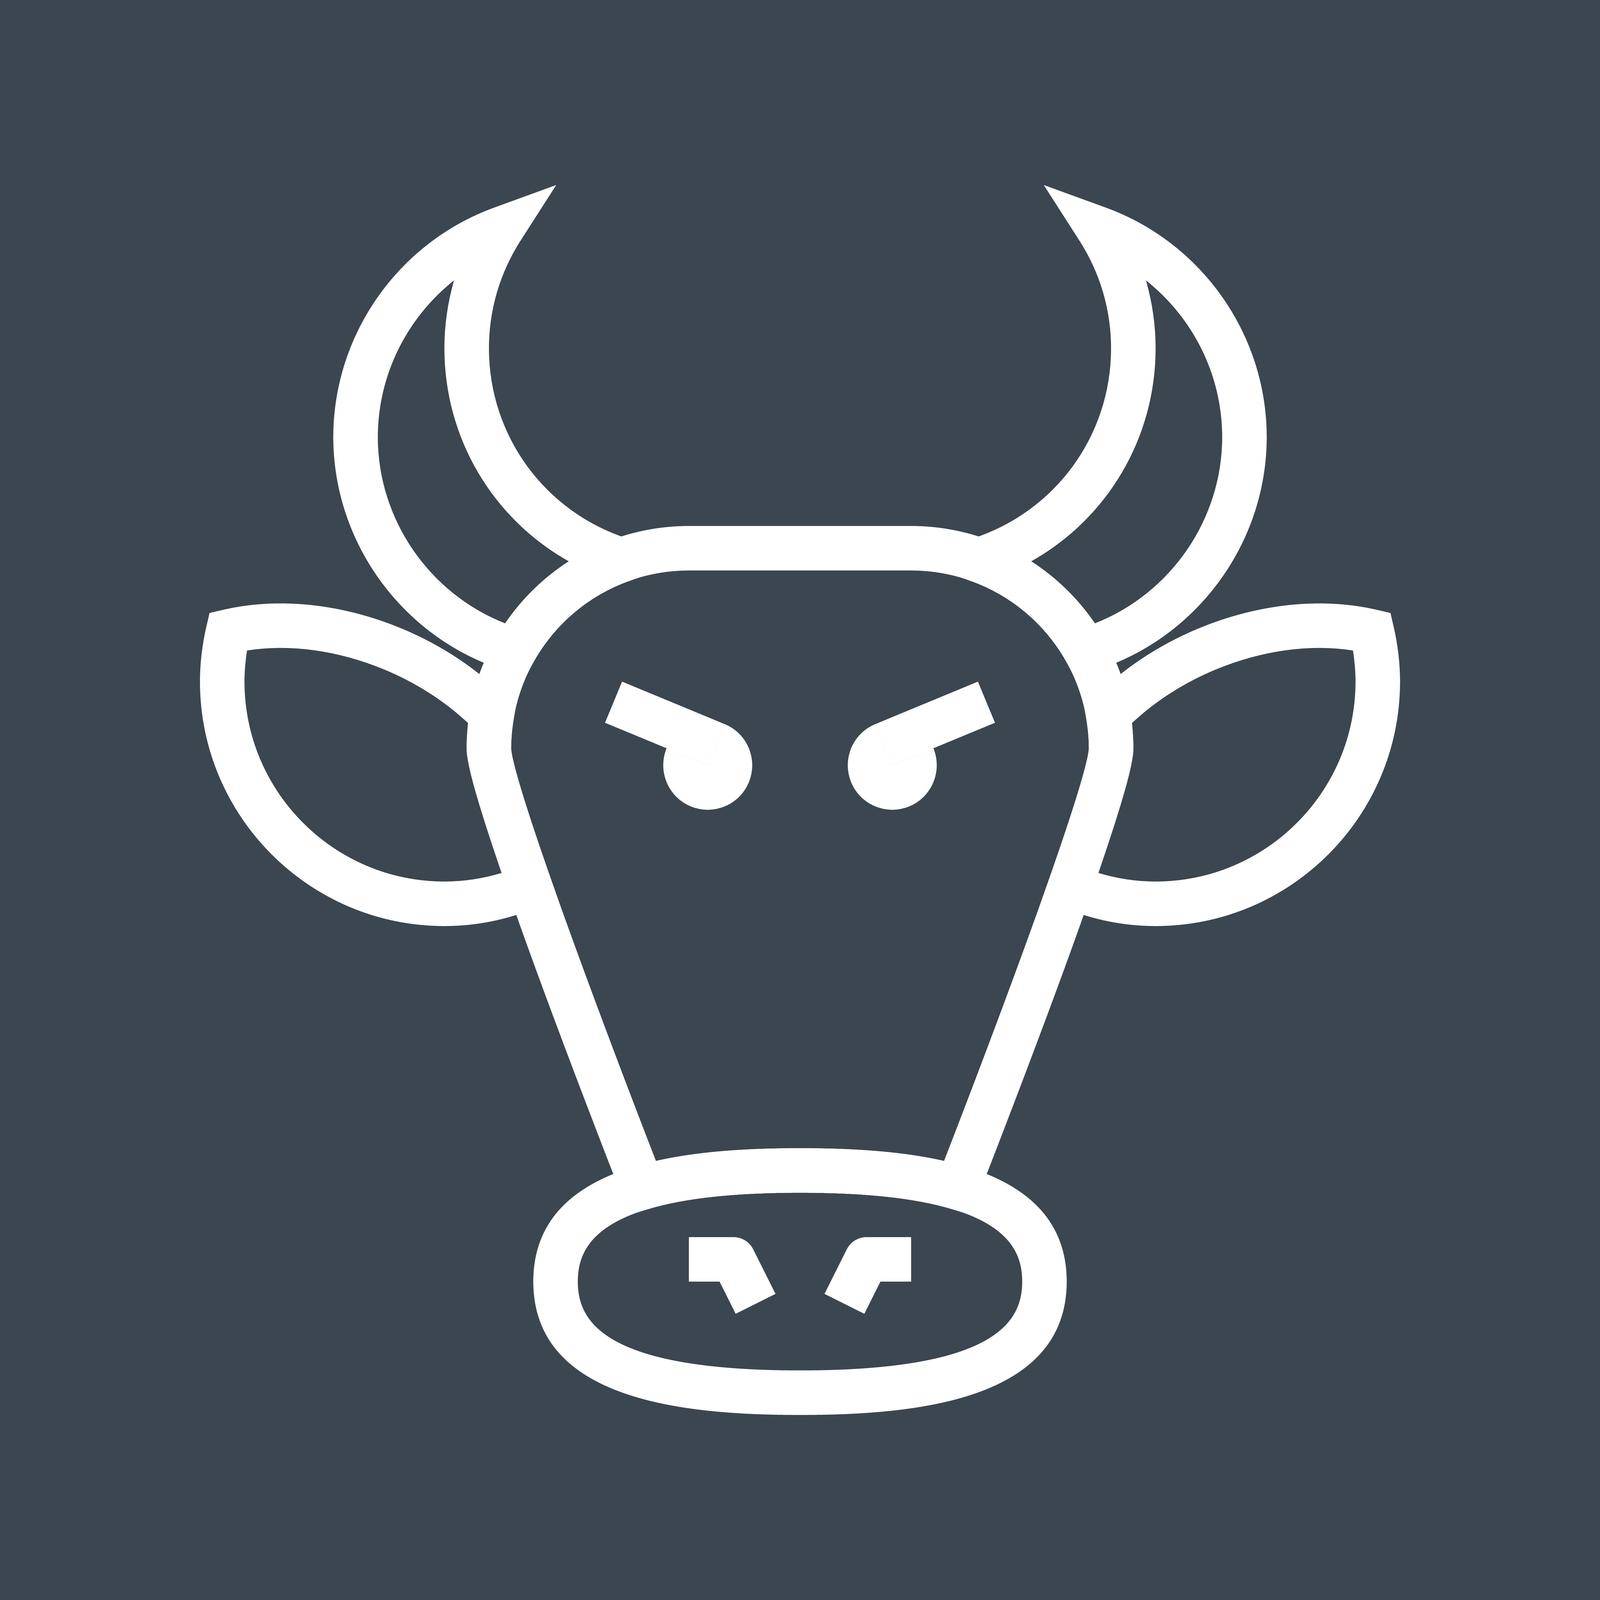 Bull Market Thin Line Vector Icon. Flat icon isolated on the black background. Editable EPS file. Vector illustration.